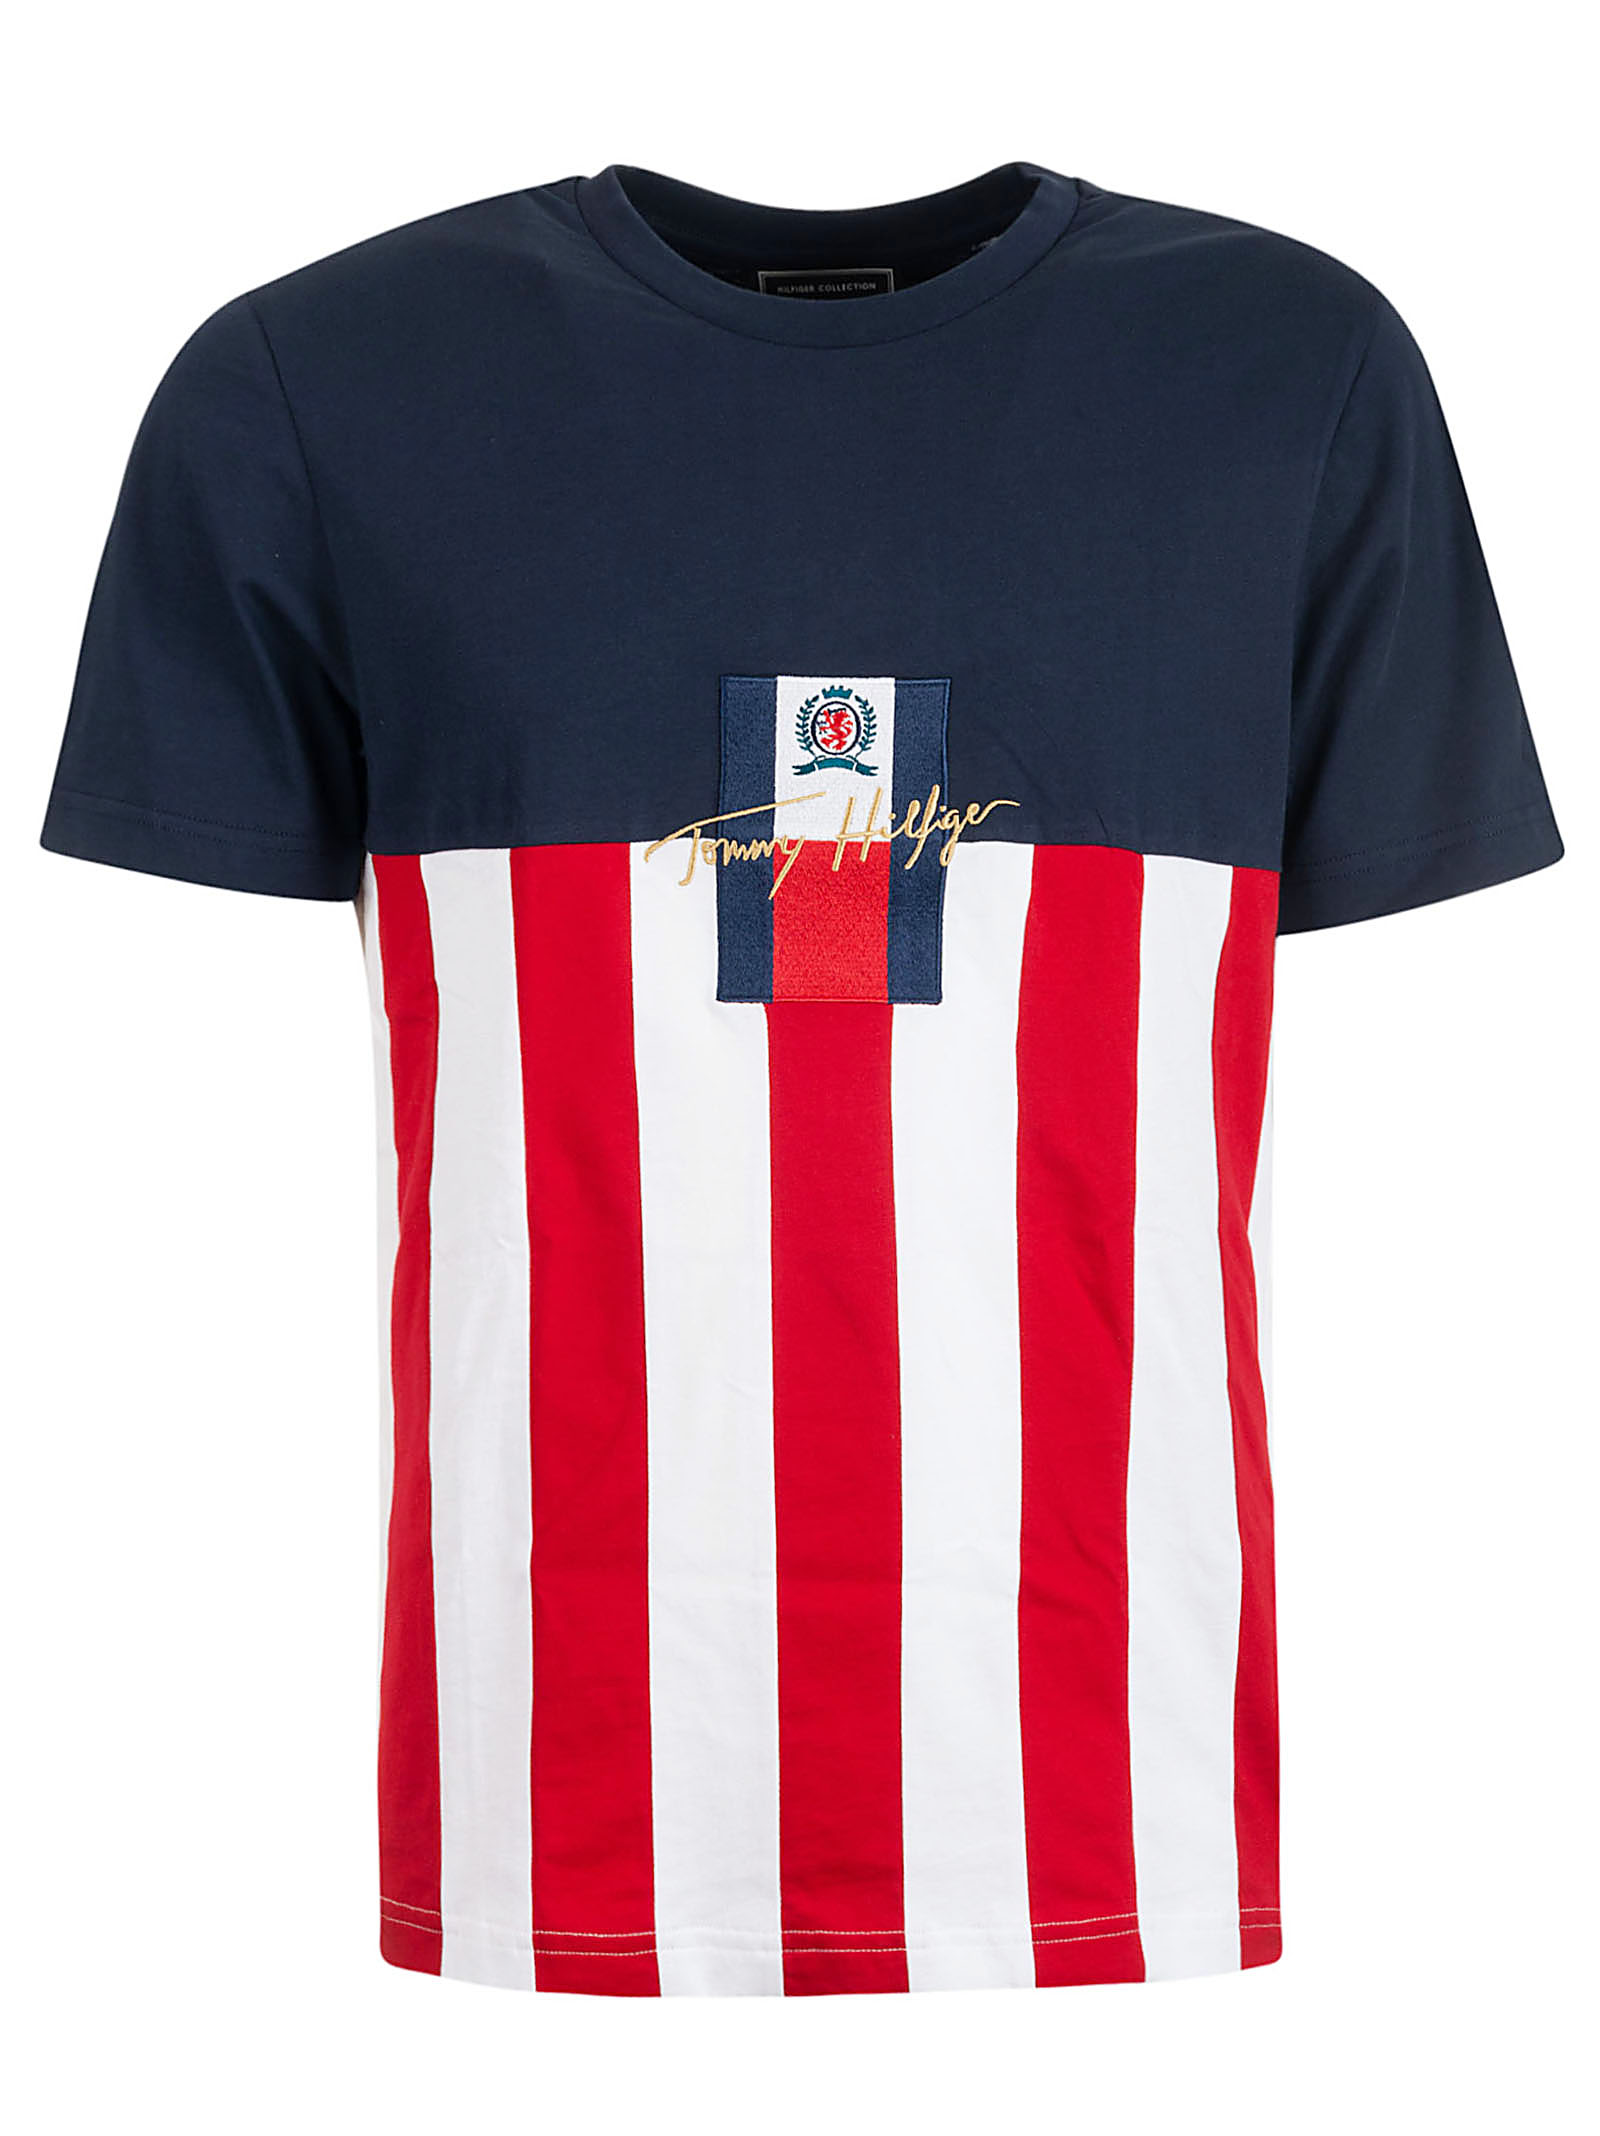 Online tommy hilfiger embroidered logo t shirt stores cheap